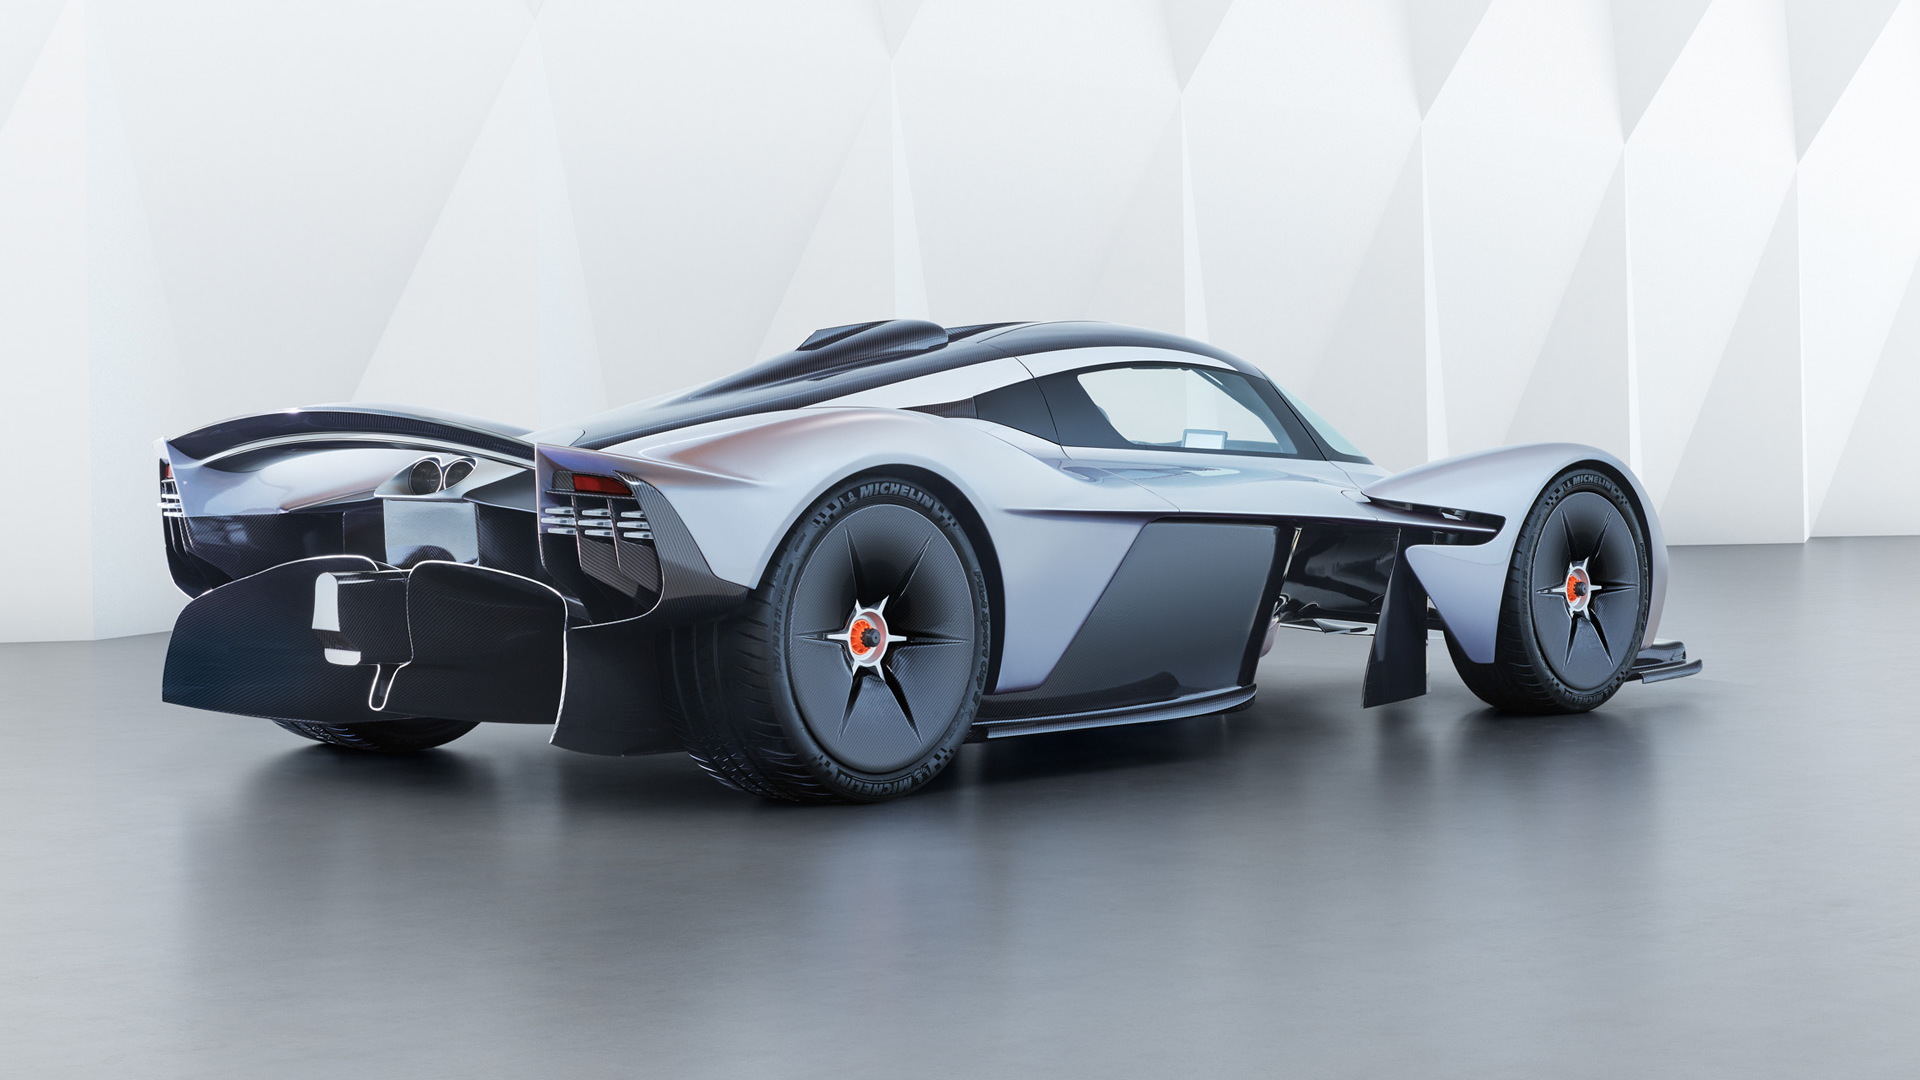 Production Aston Martin Valkyrie will be even wilder than concept